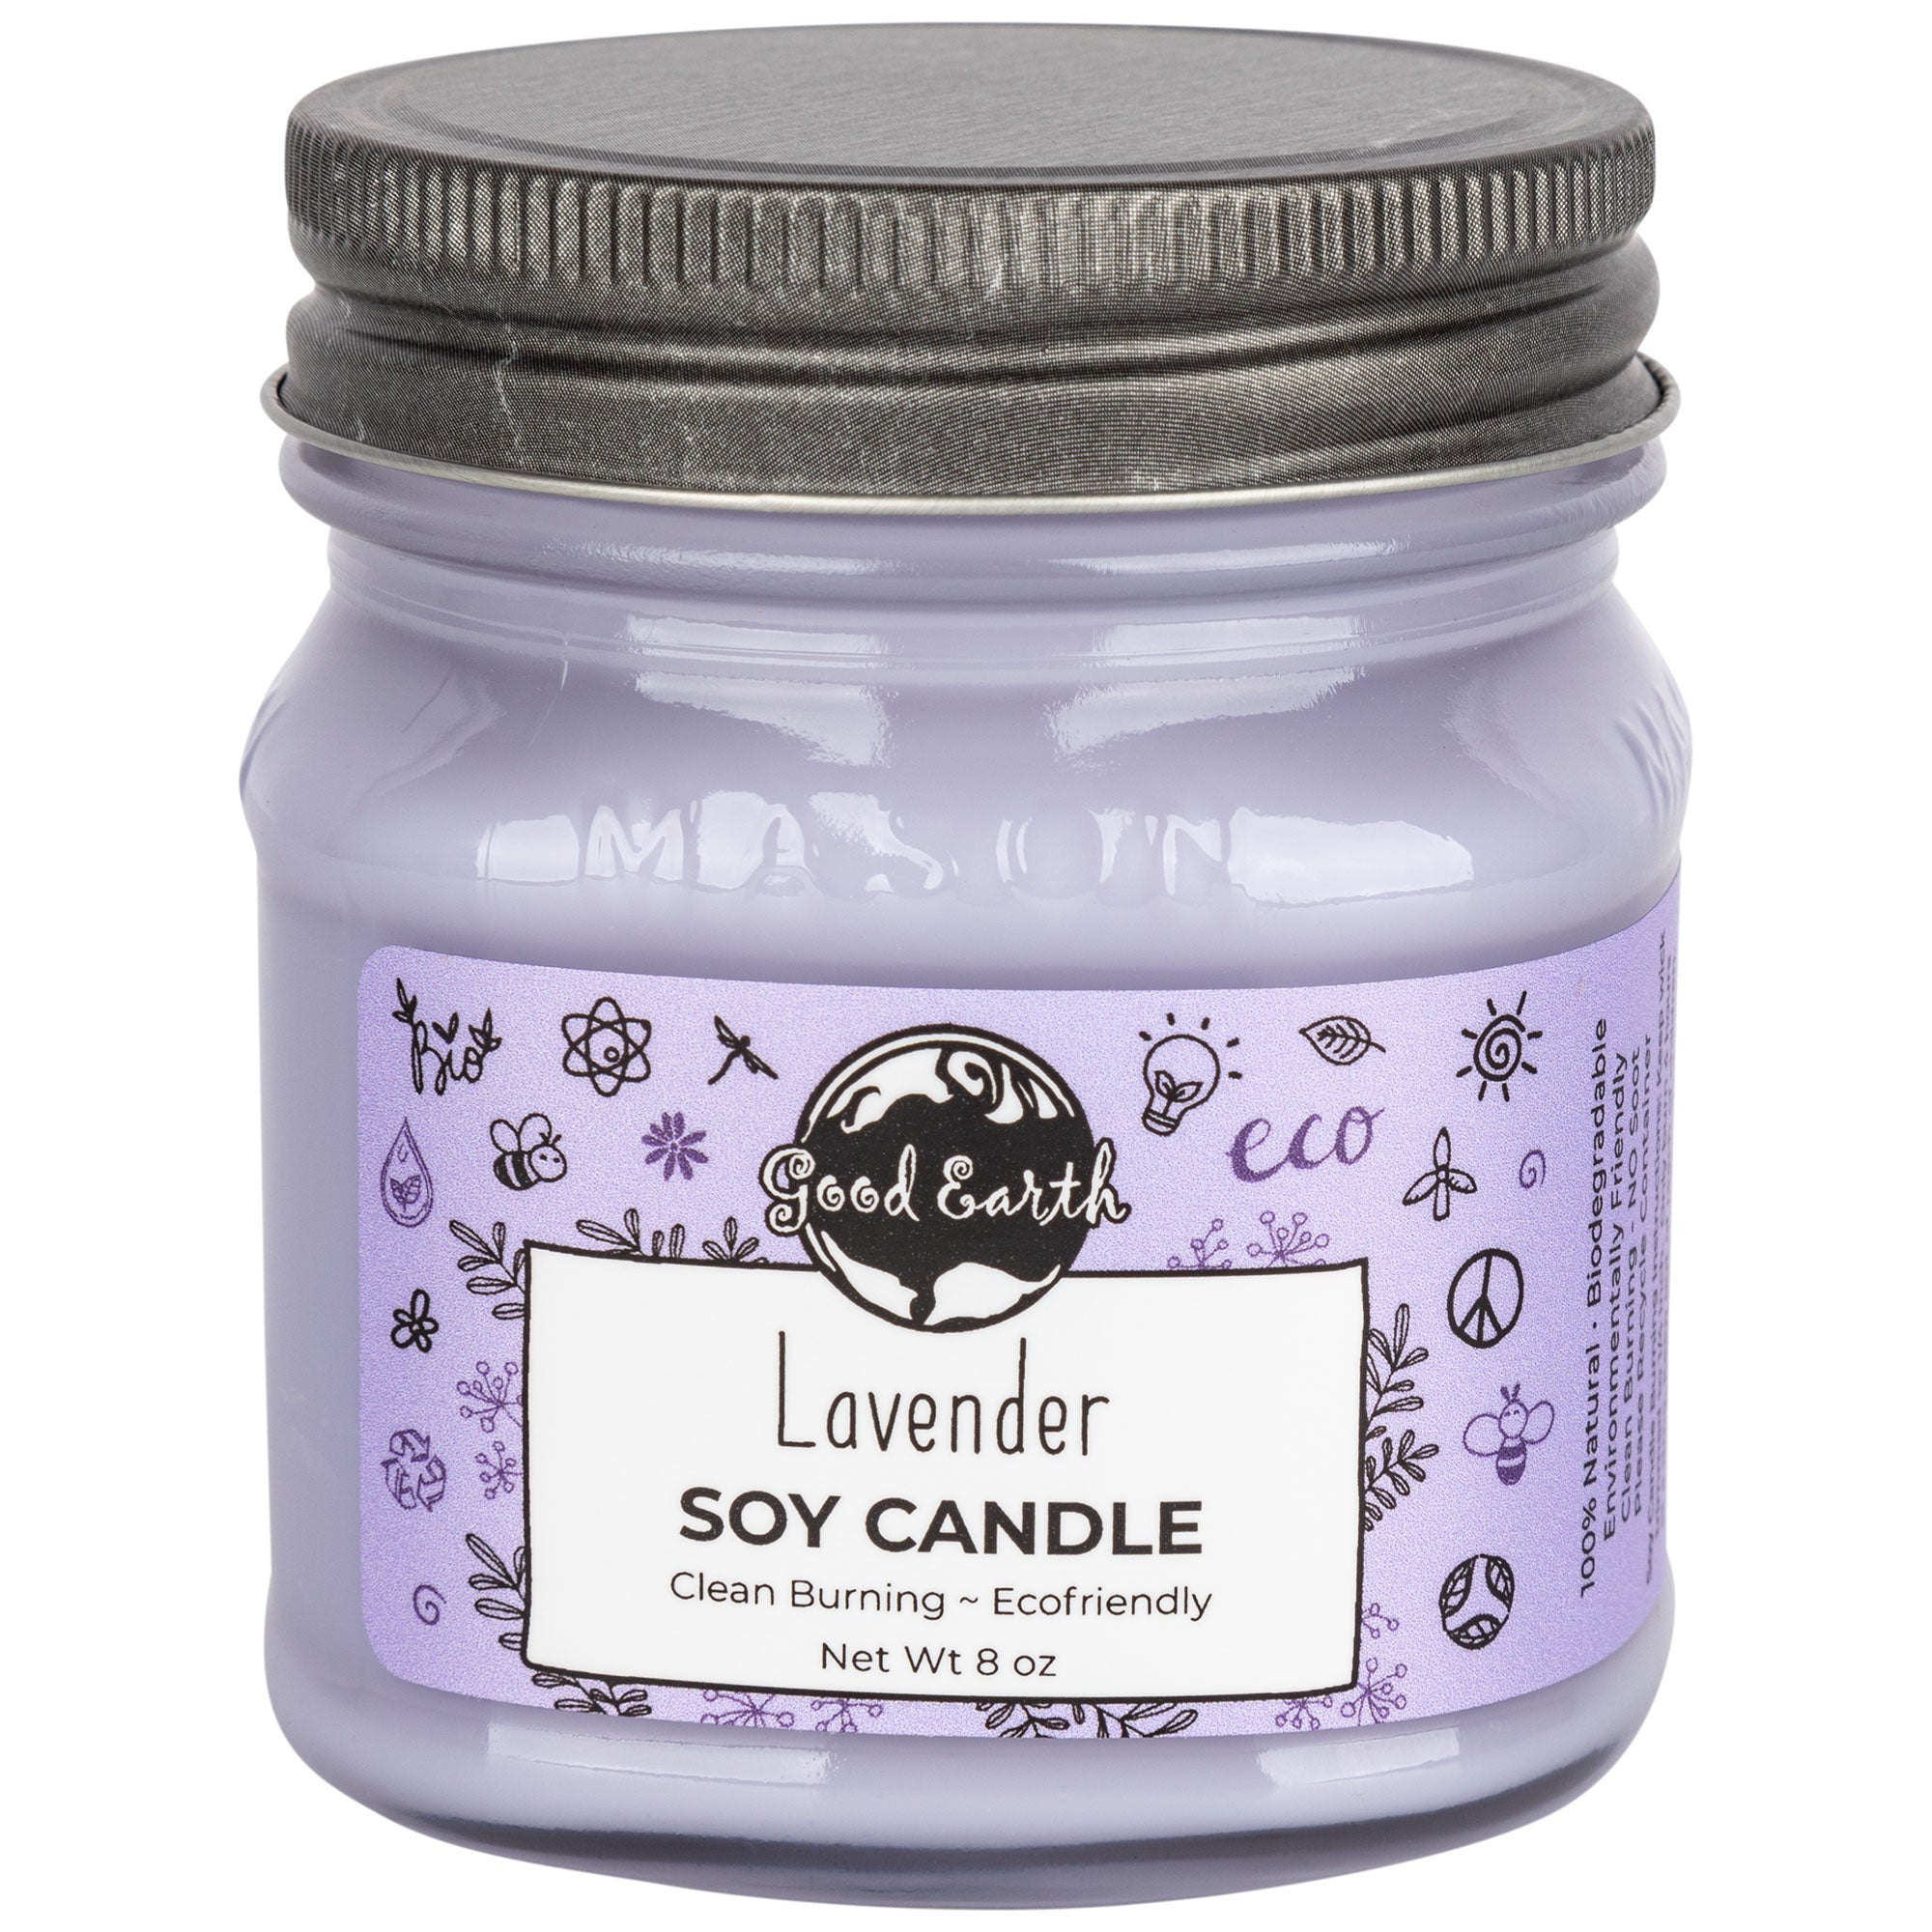 Good Earth Soy Candle - Lavender